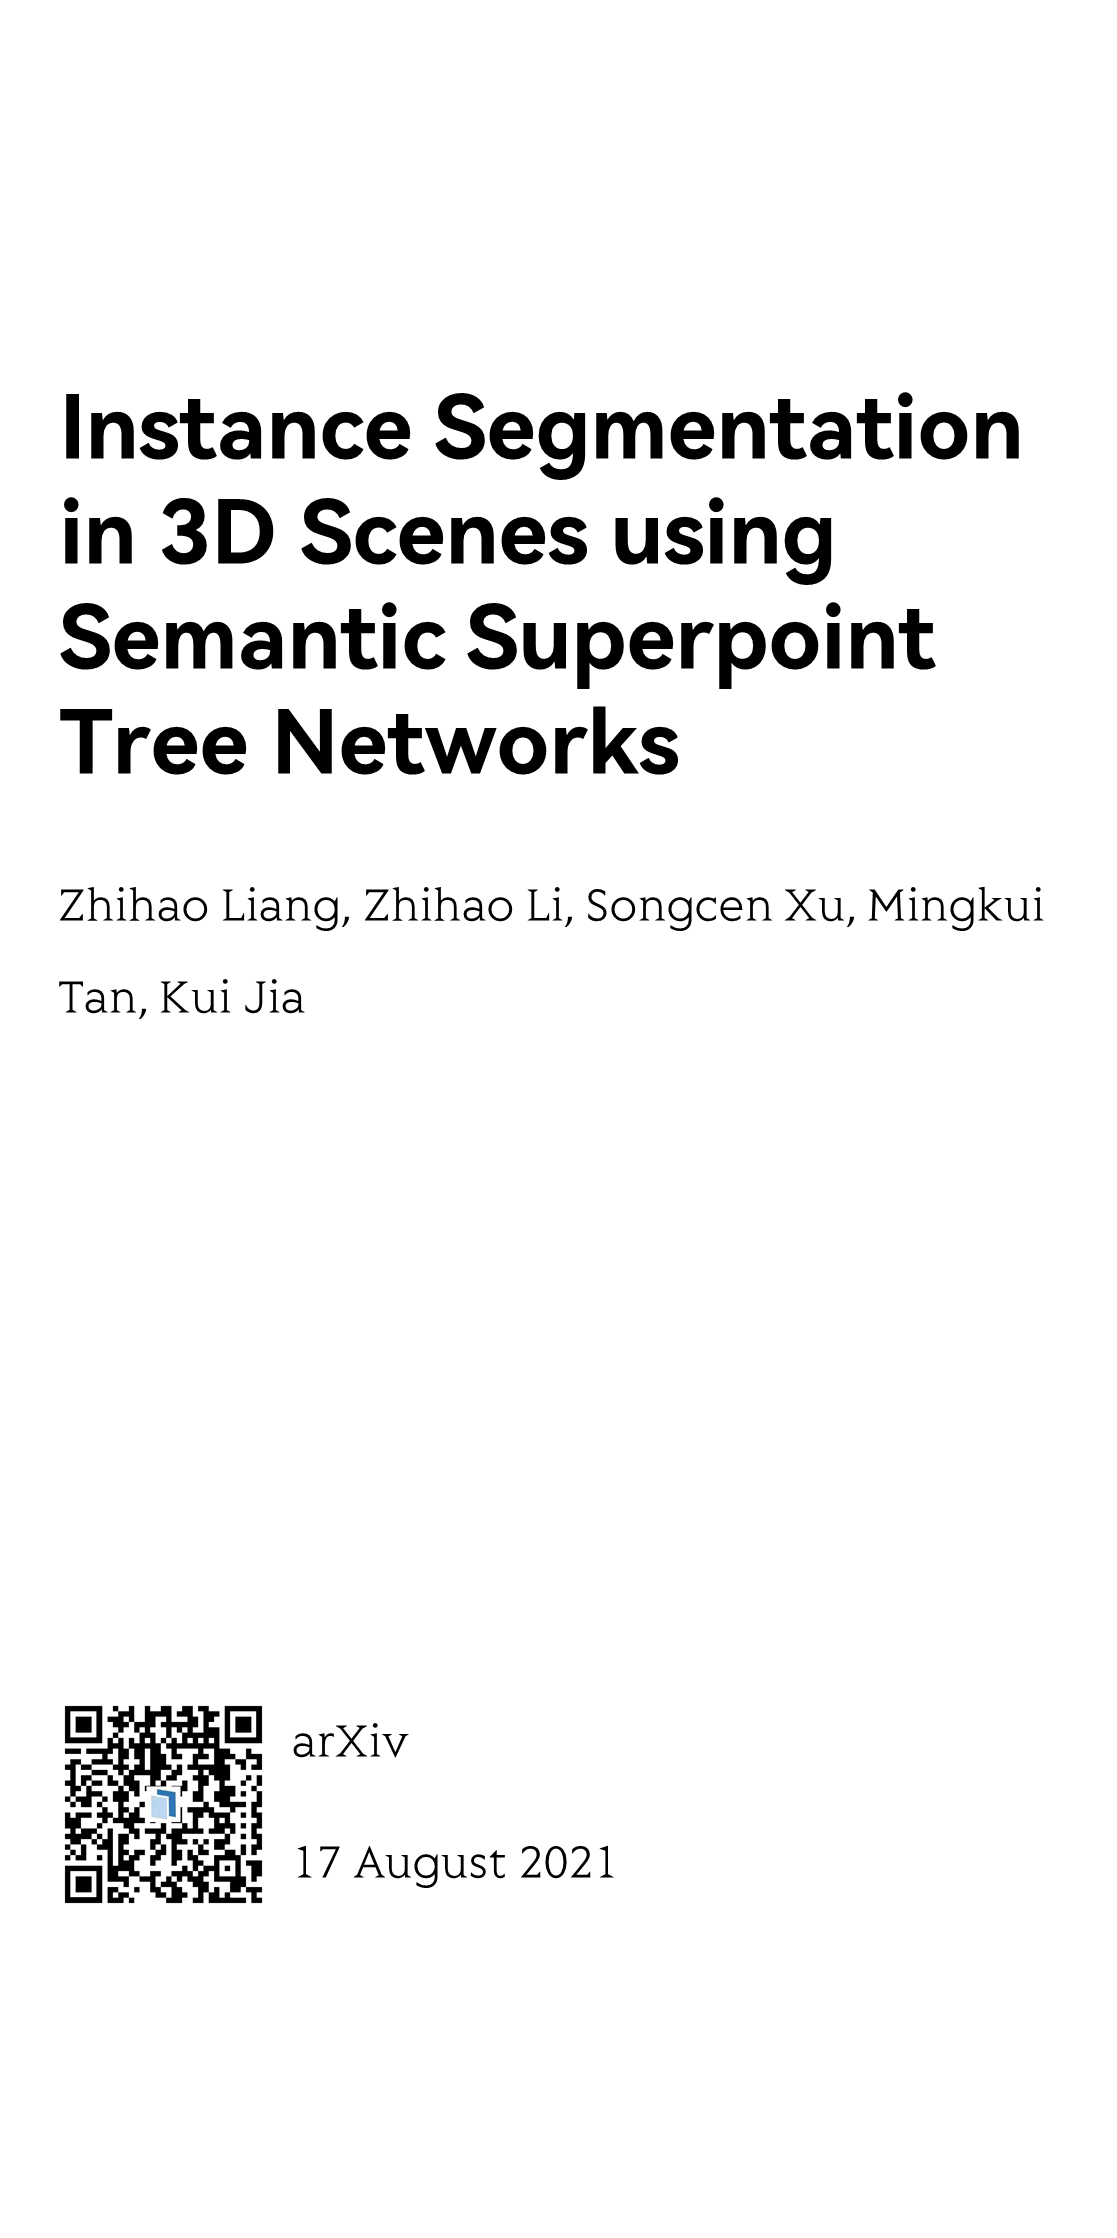 Instance Segmentation in 3D Scenes using Semantic Superpoint Tree Networks_1